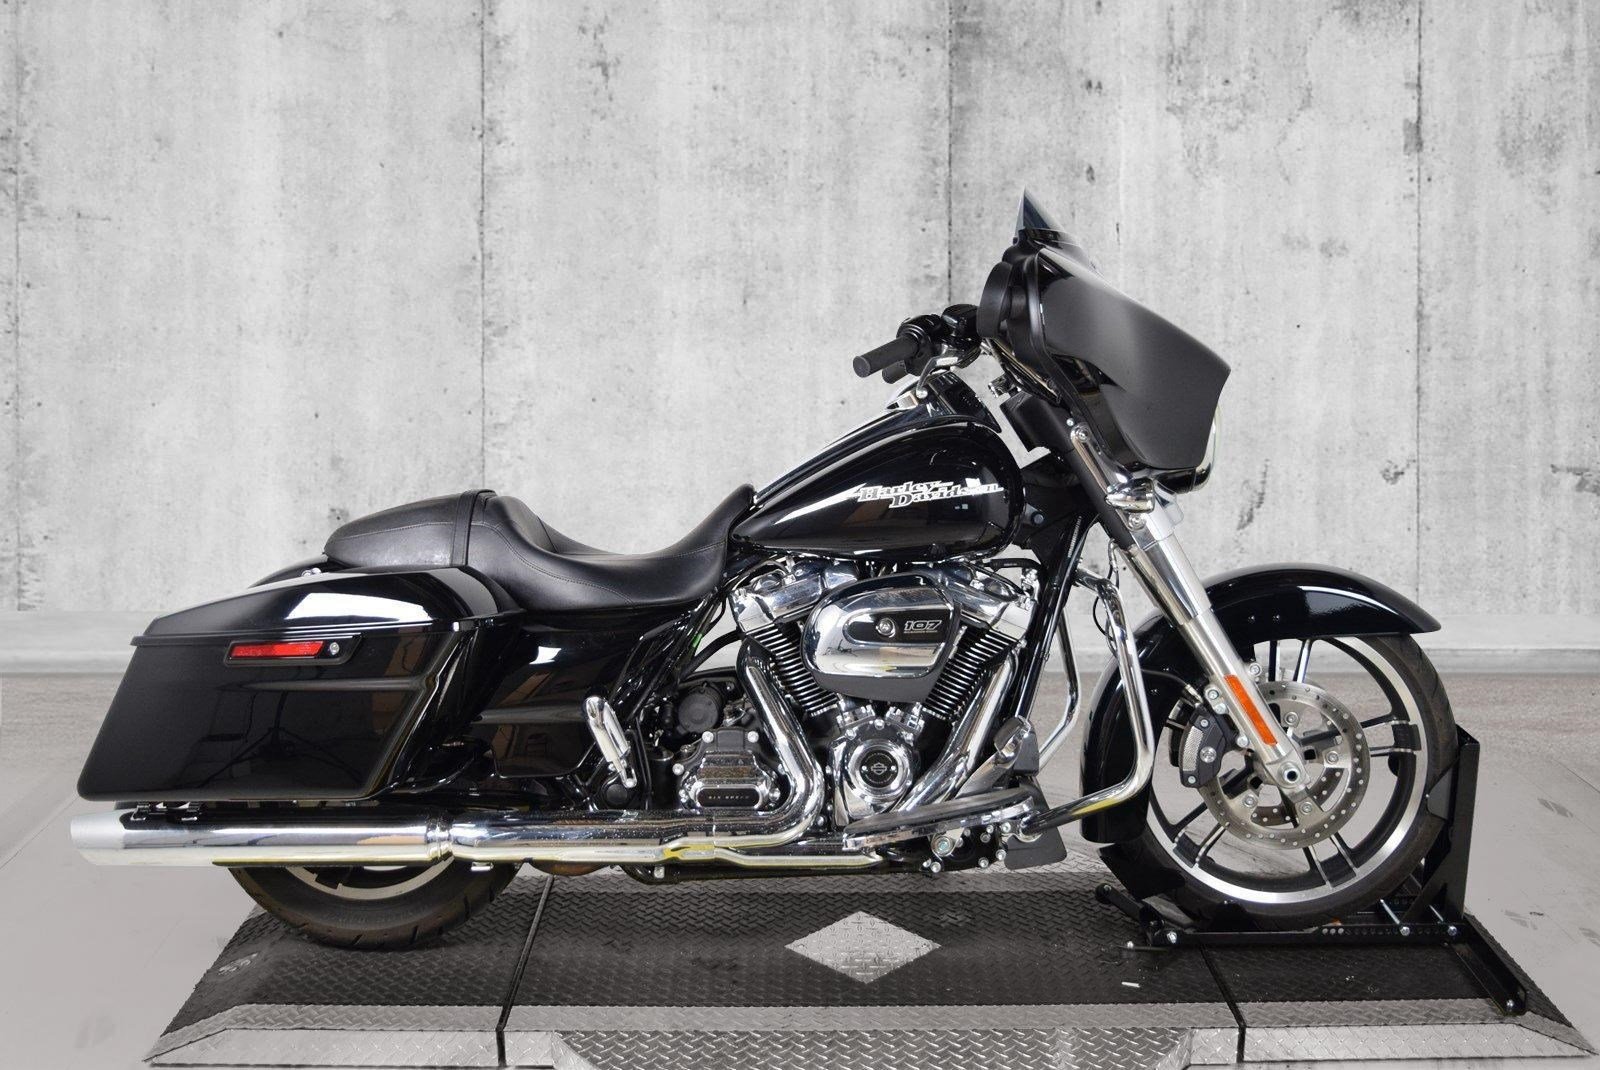 Pre-Owned 2019 Harley-Davidson Street Glide FLHX Touring ...